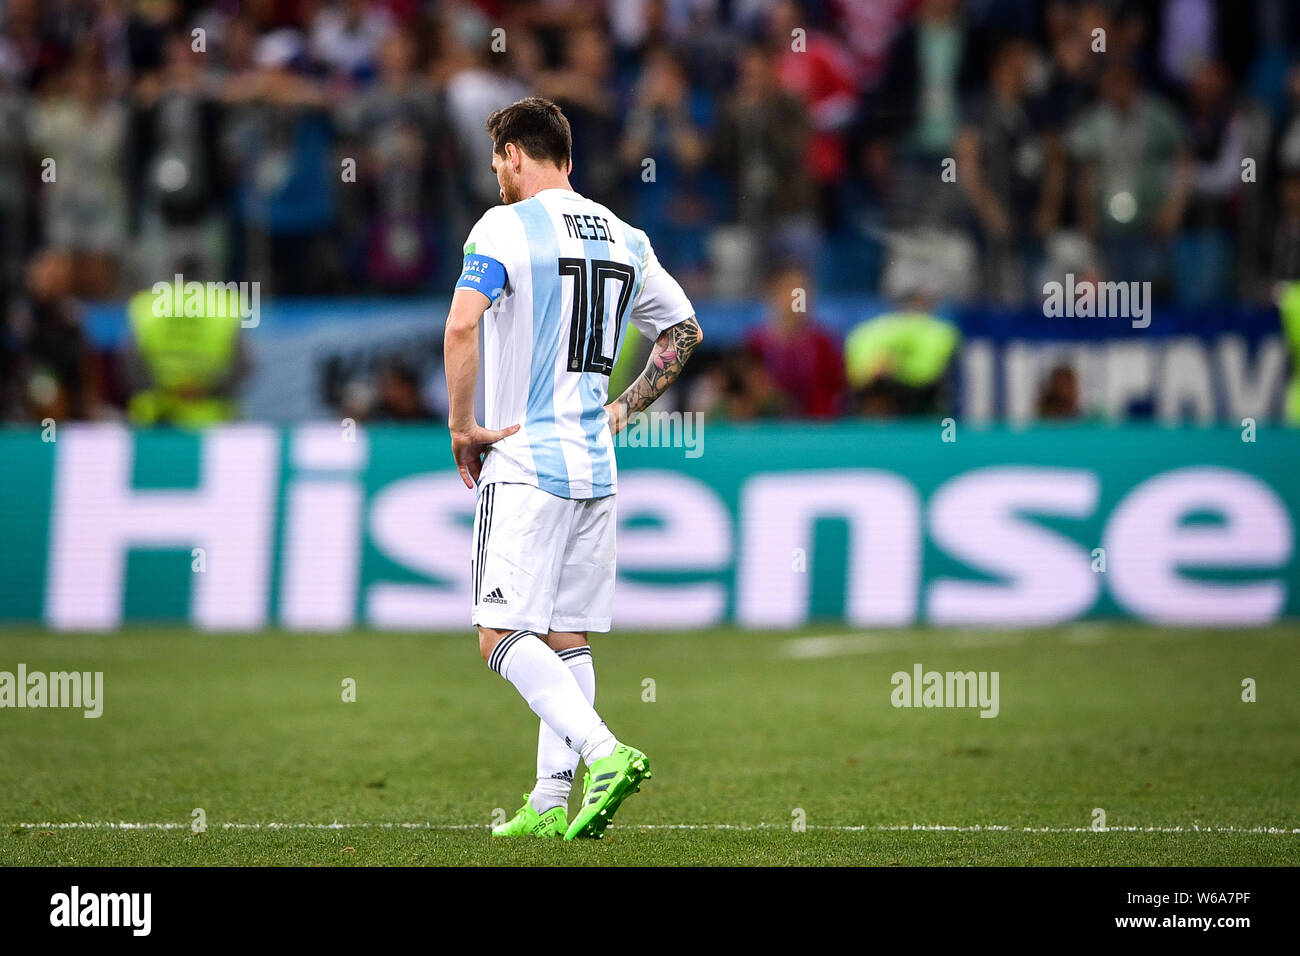 Lionel Messi of Argentina reacts after Luka Modric of Croatia scored a goal in their Group D match during the 2018 FIFA World Cup in Nizhny Novgorod, Stock Photo